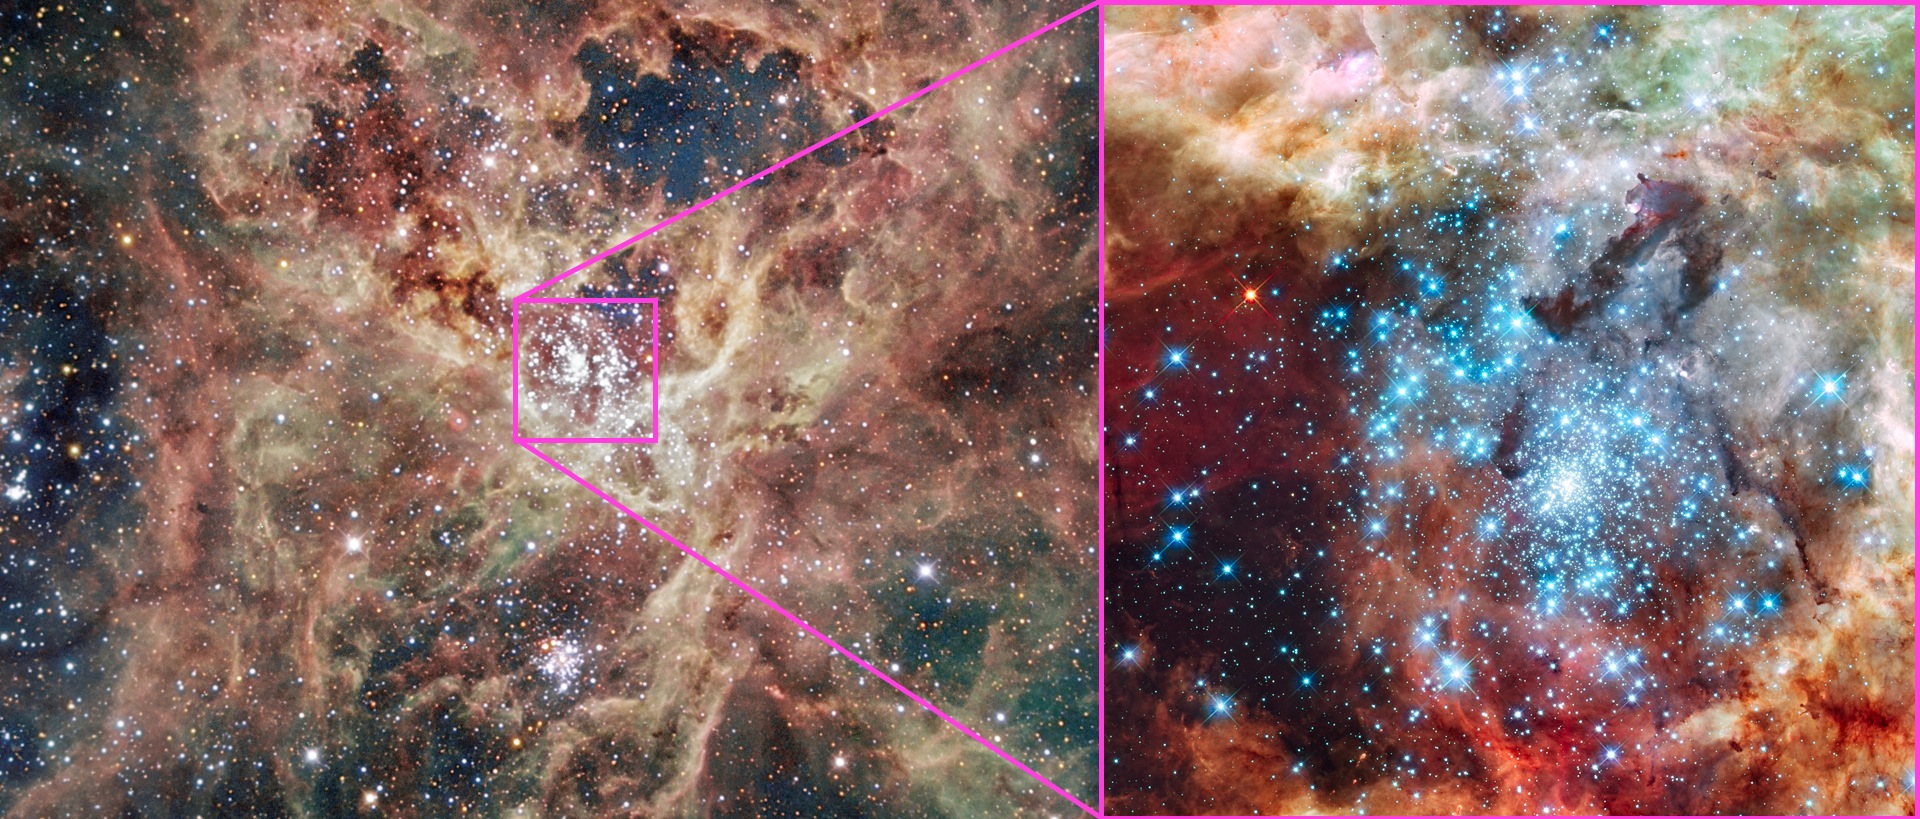 The giant star-forming Tarantula Nebula in the Large Magellanic Cloud and the central merging star cluster NGC 2070, containing the enormous R136a1 at the center.